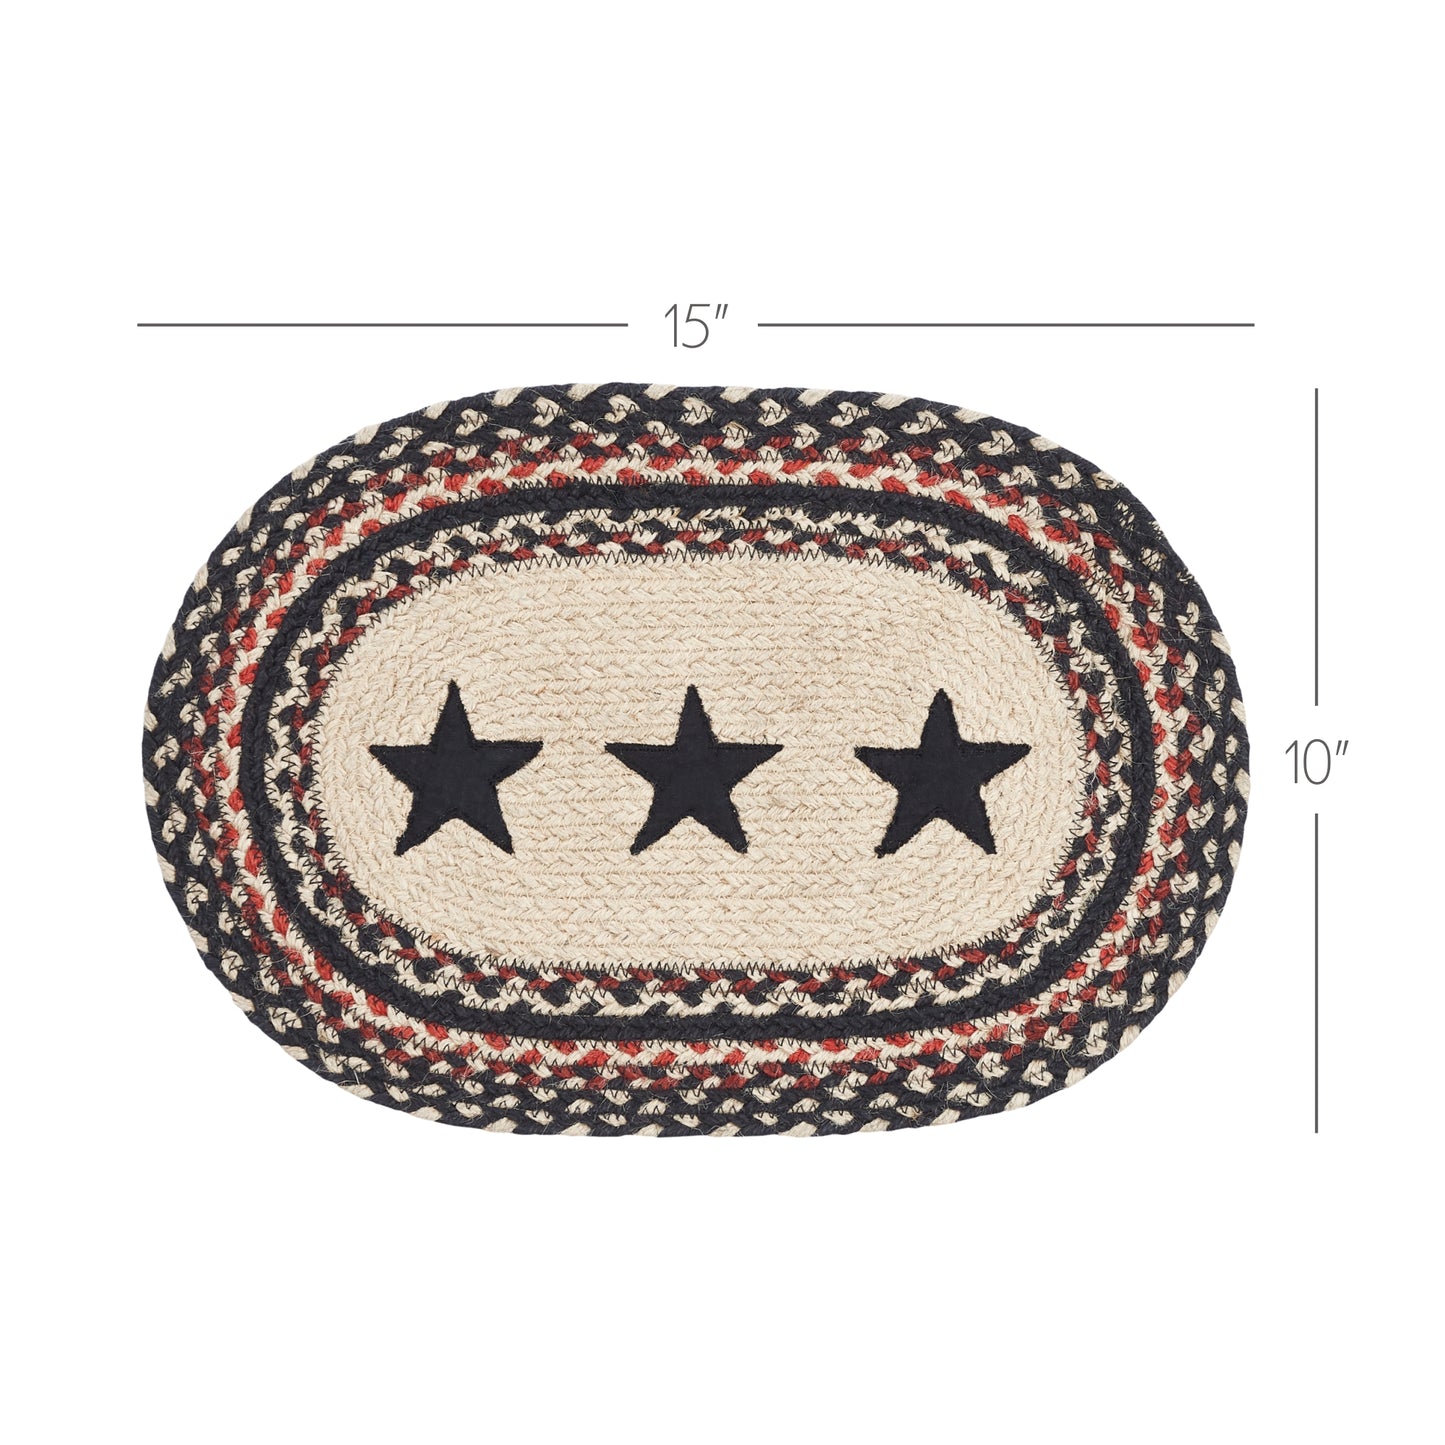 67135-Colonial-Star-Jute-Oval-Placemat-10x15-image-4